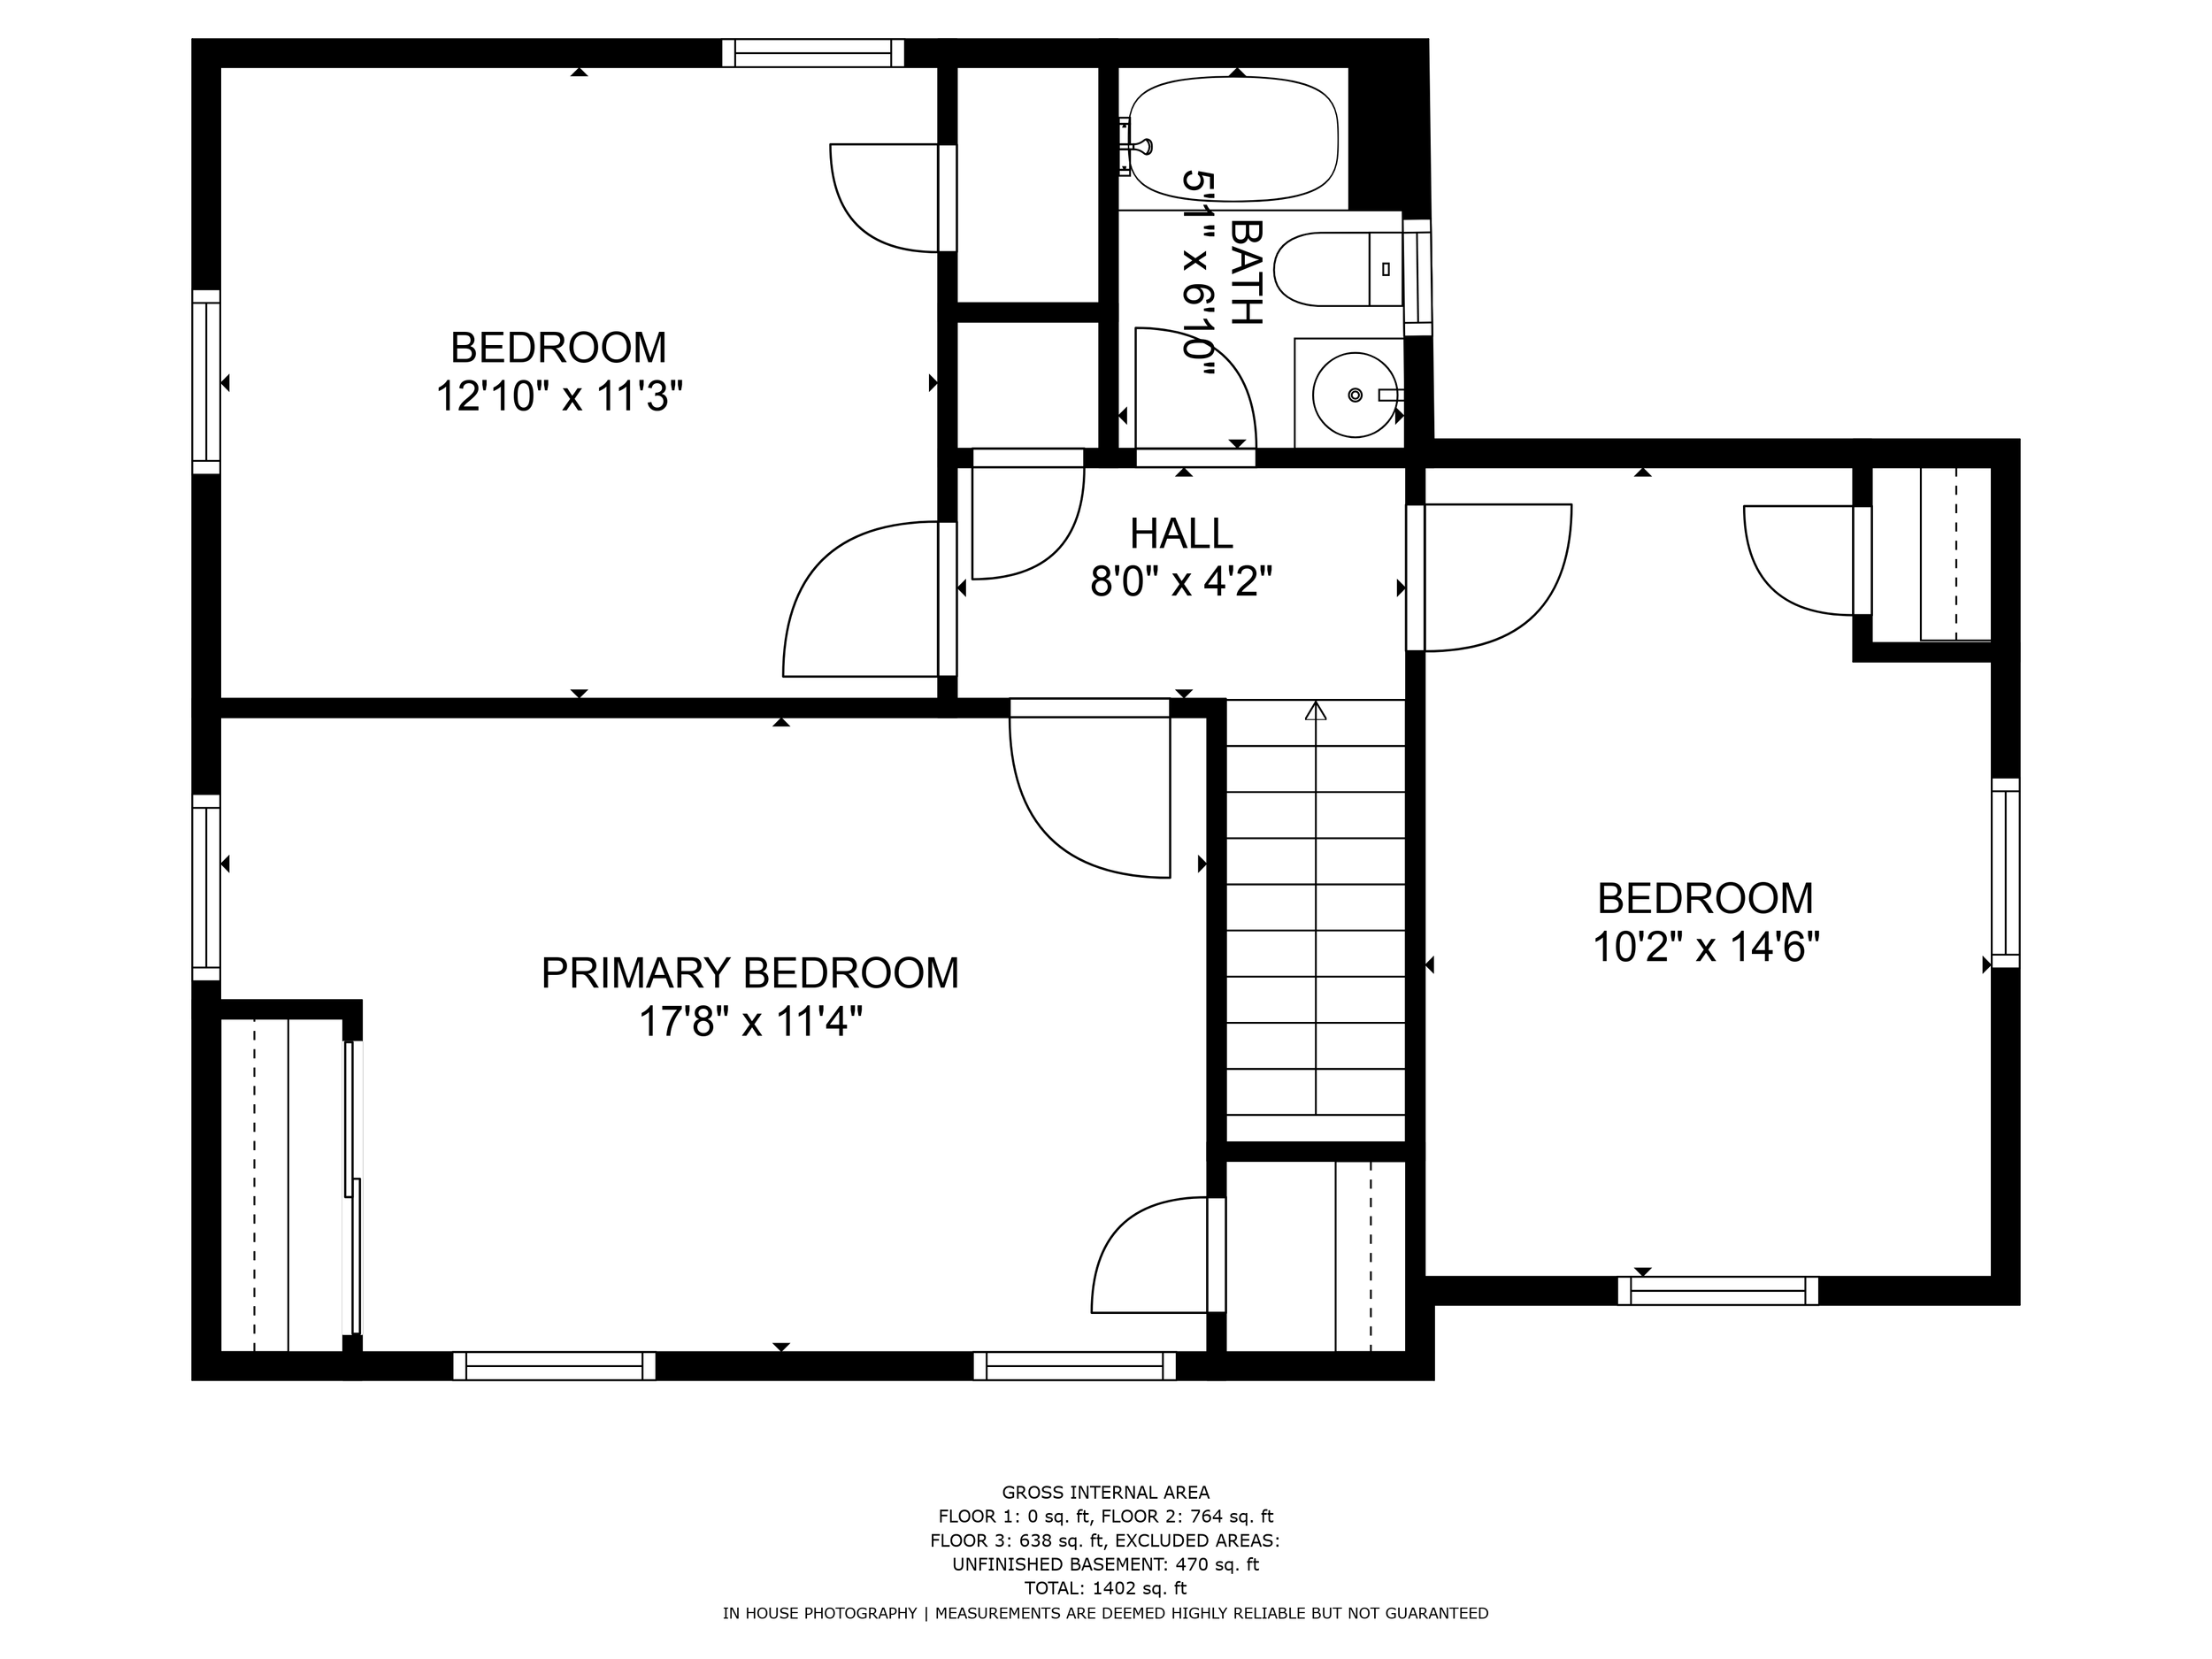 3rd_floor_dimensions_80_irving_ave_livingston.png